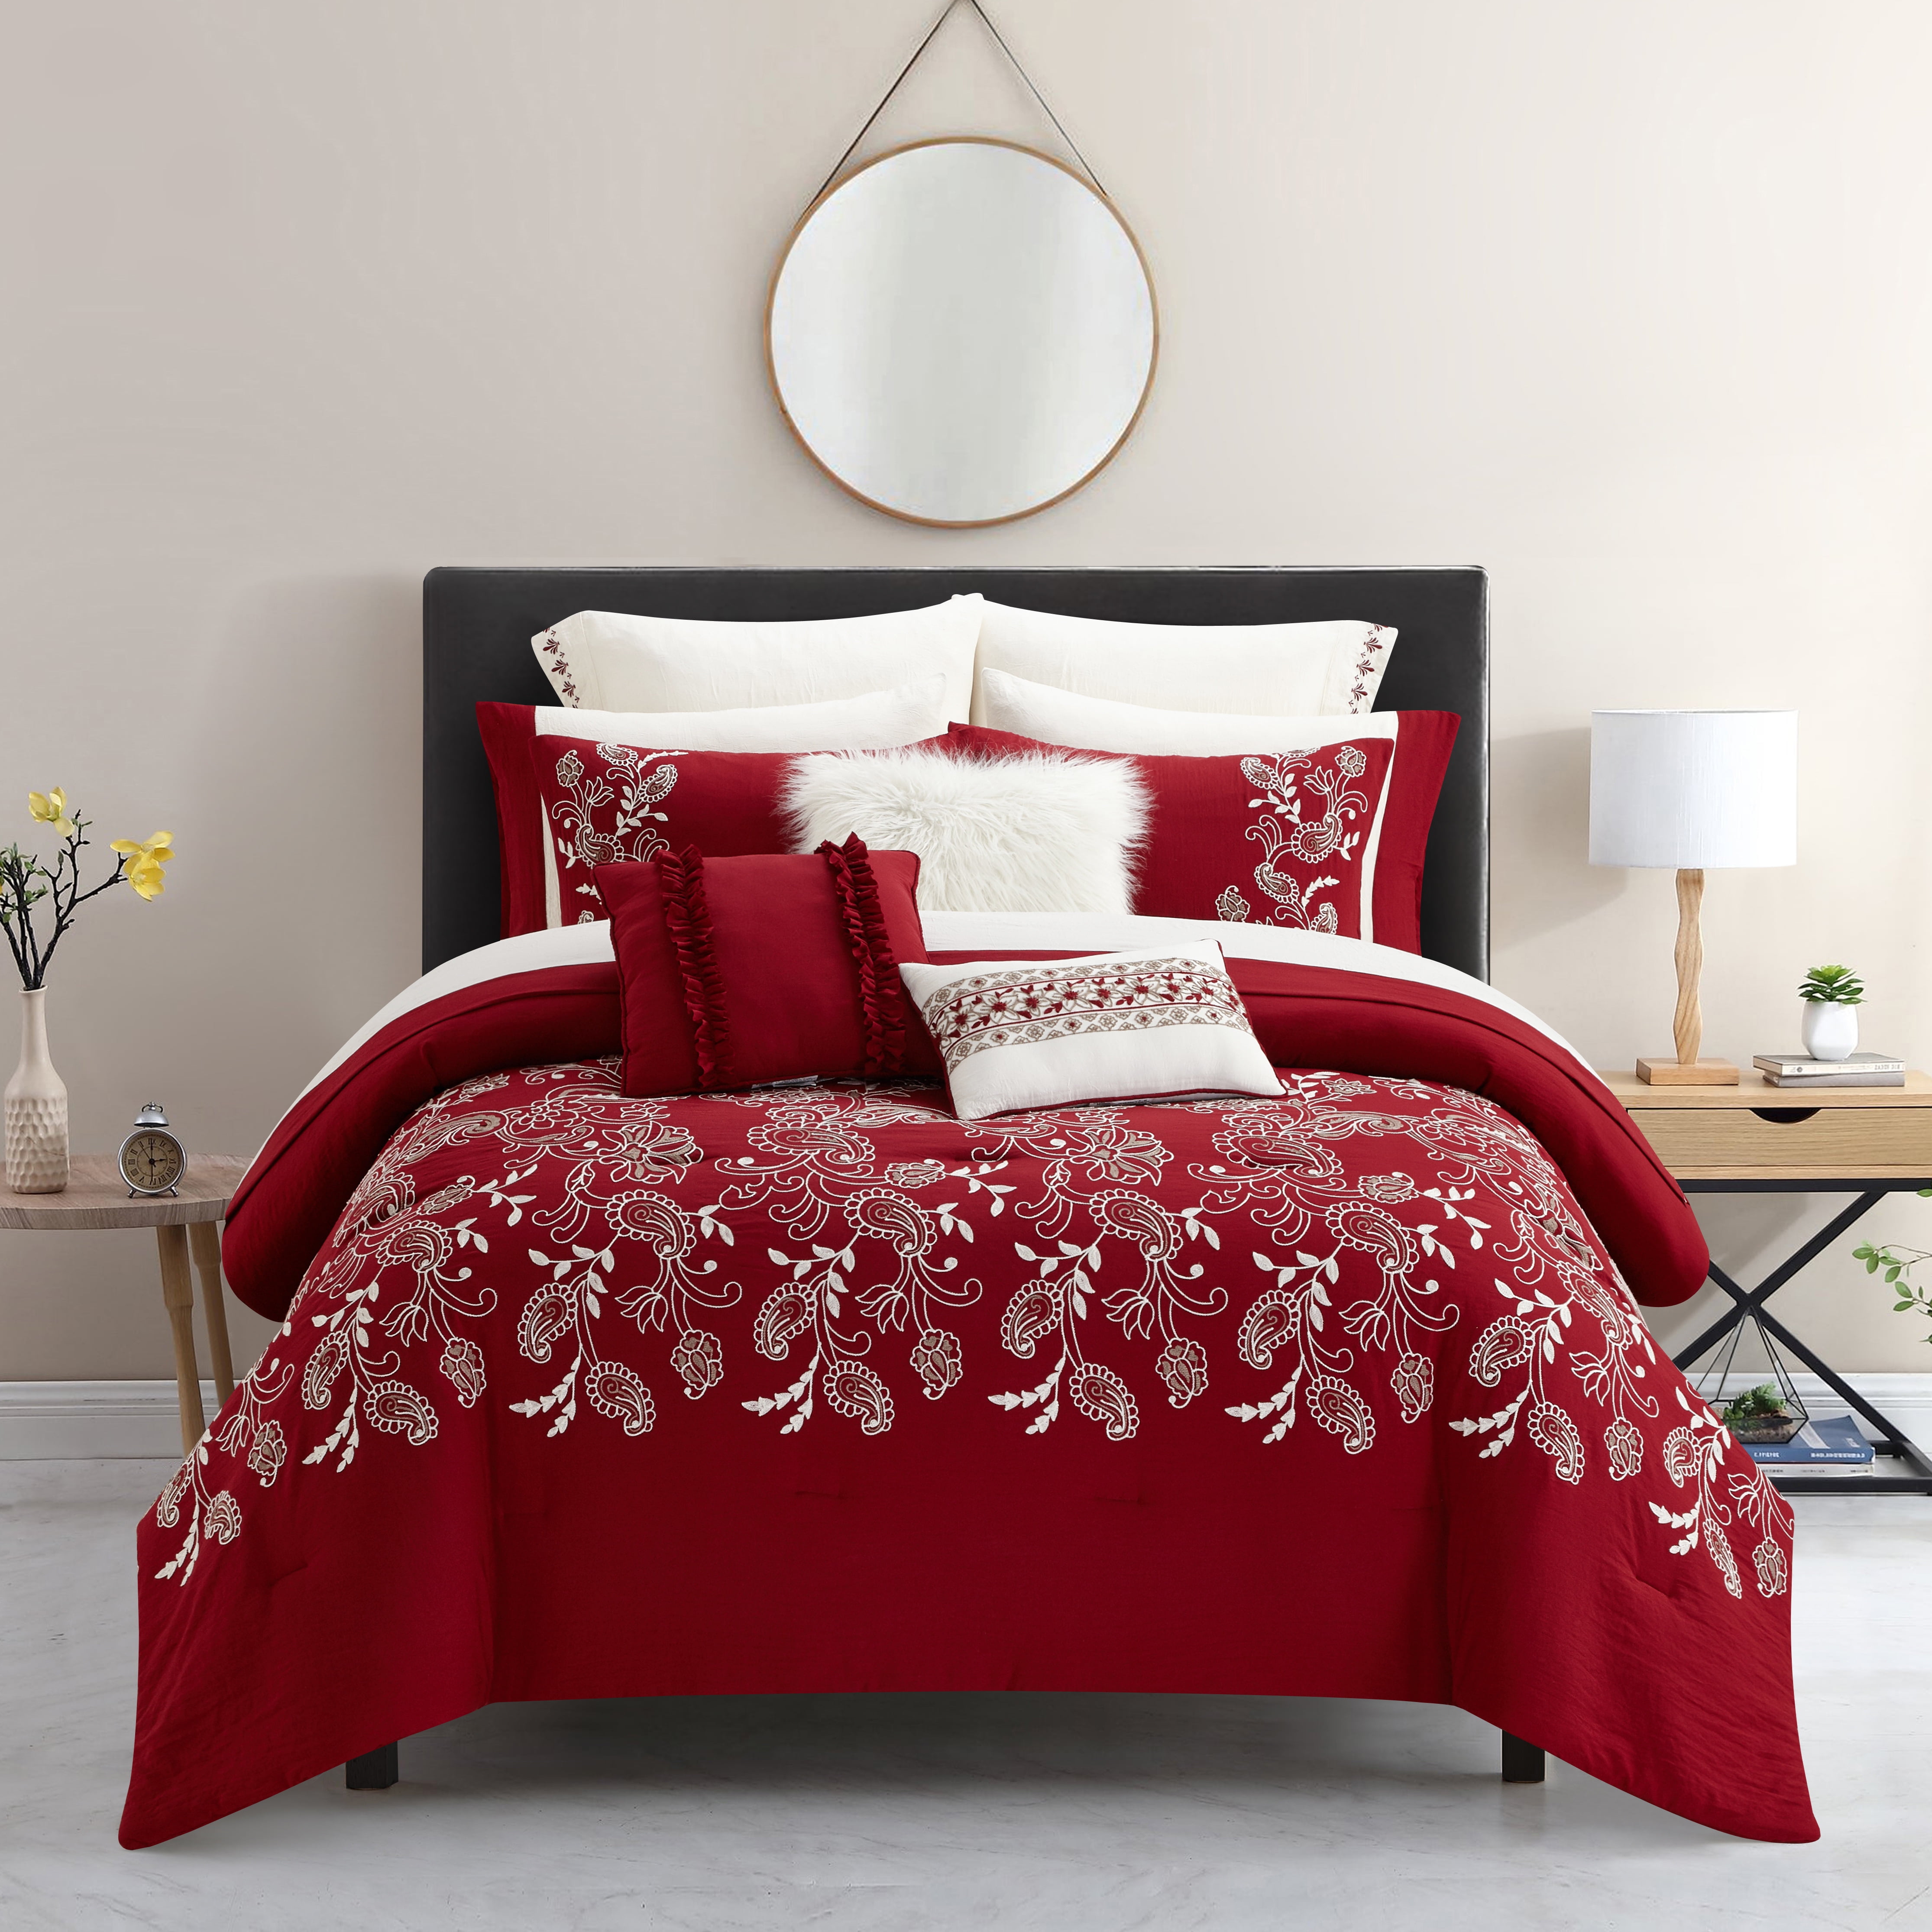 Full Queen Cal King Bed Burgundy Red Floral 3 pc Quilt Set Bedspread Coverlet 